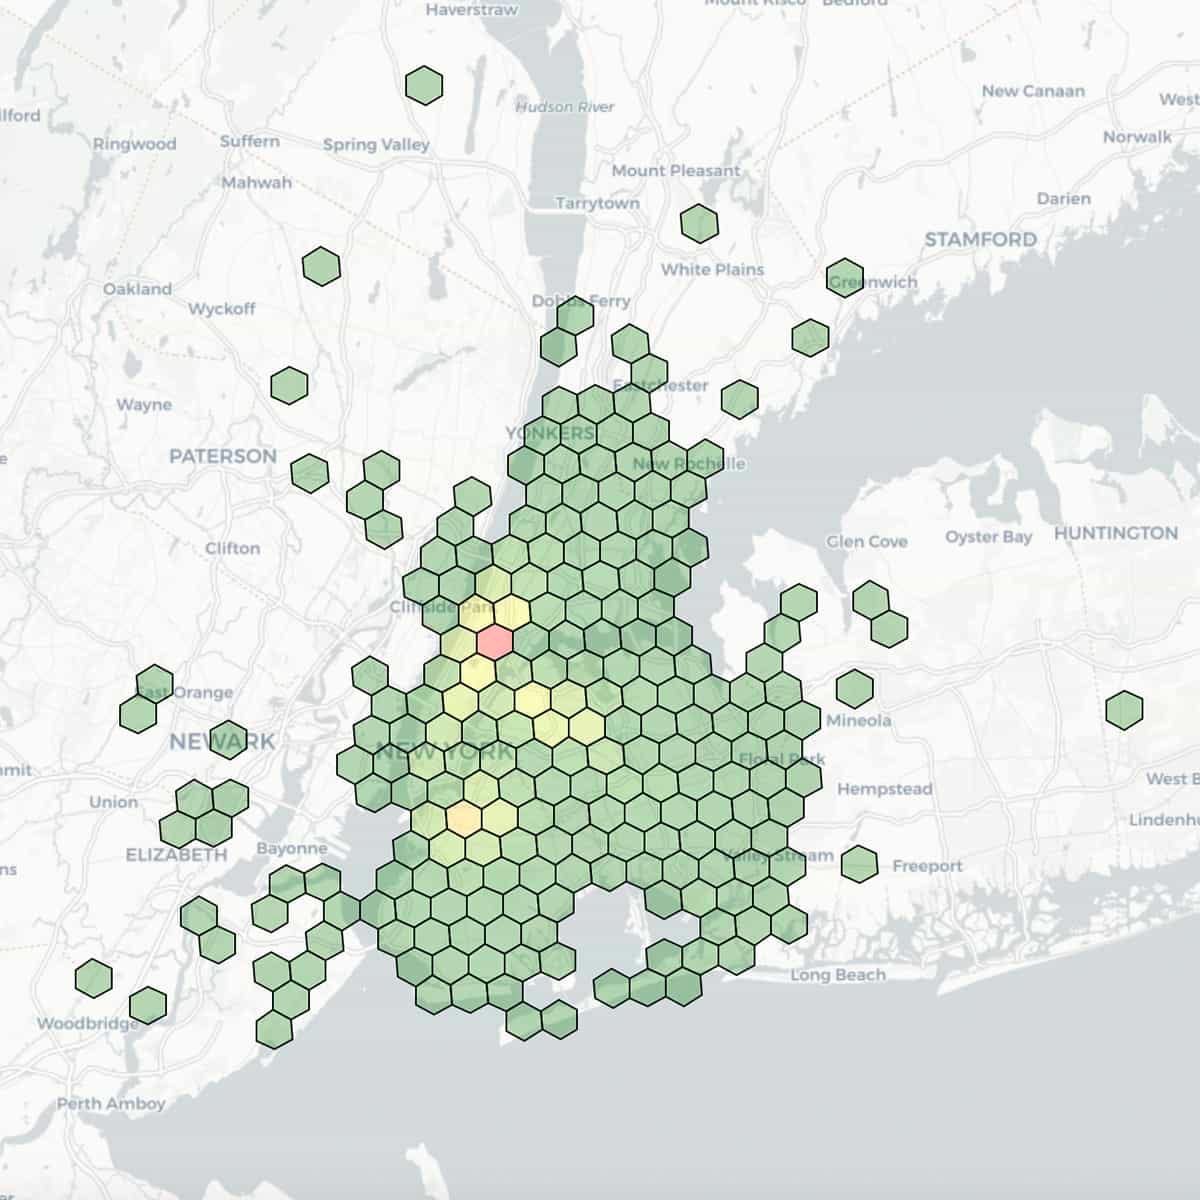 This is a geospatial visualization of taxi dropoff locations in New York City with cell colors indicating aggregated counts therein.